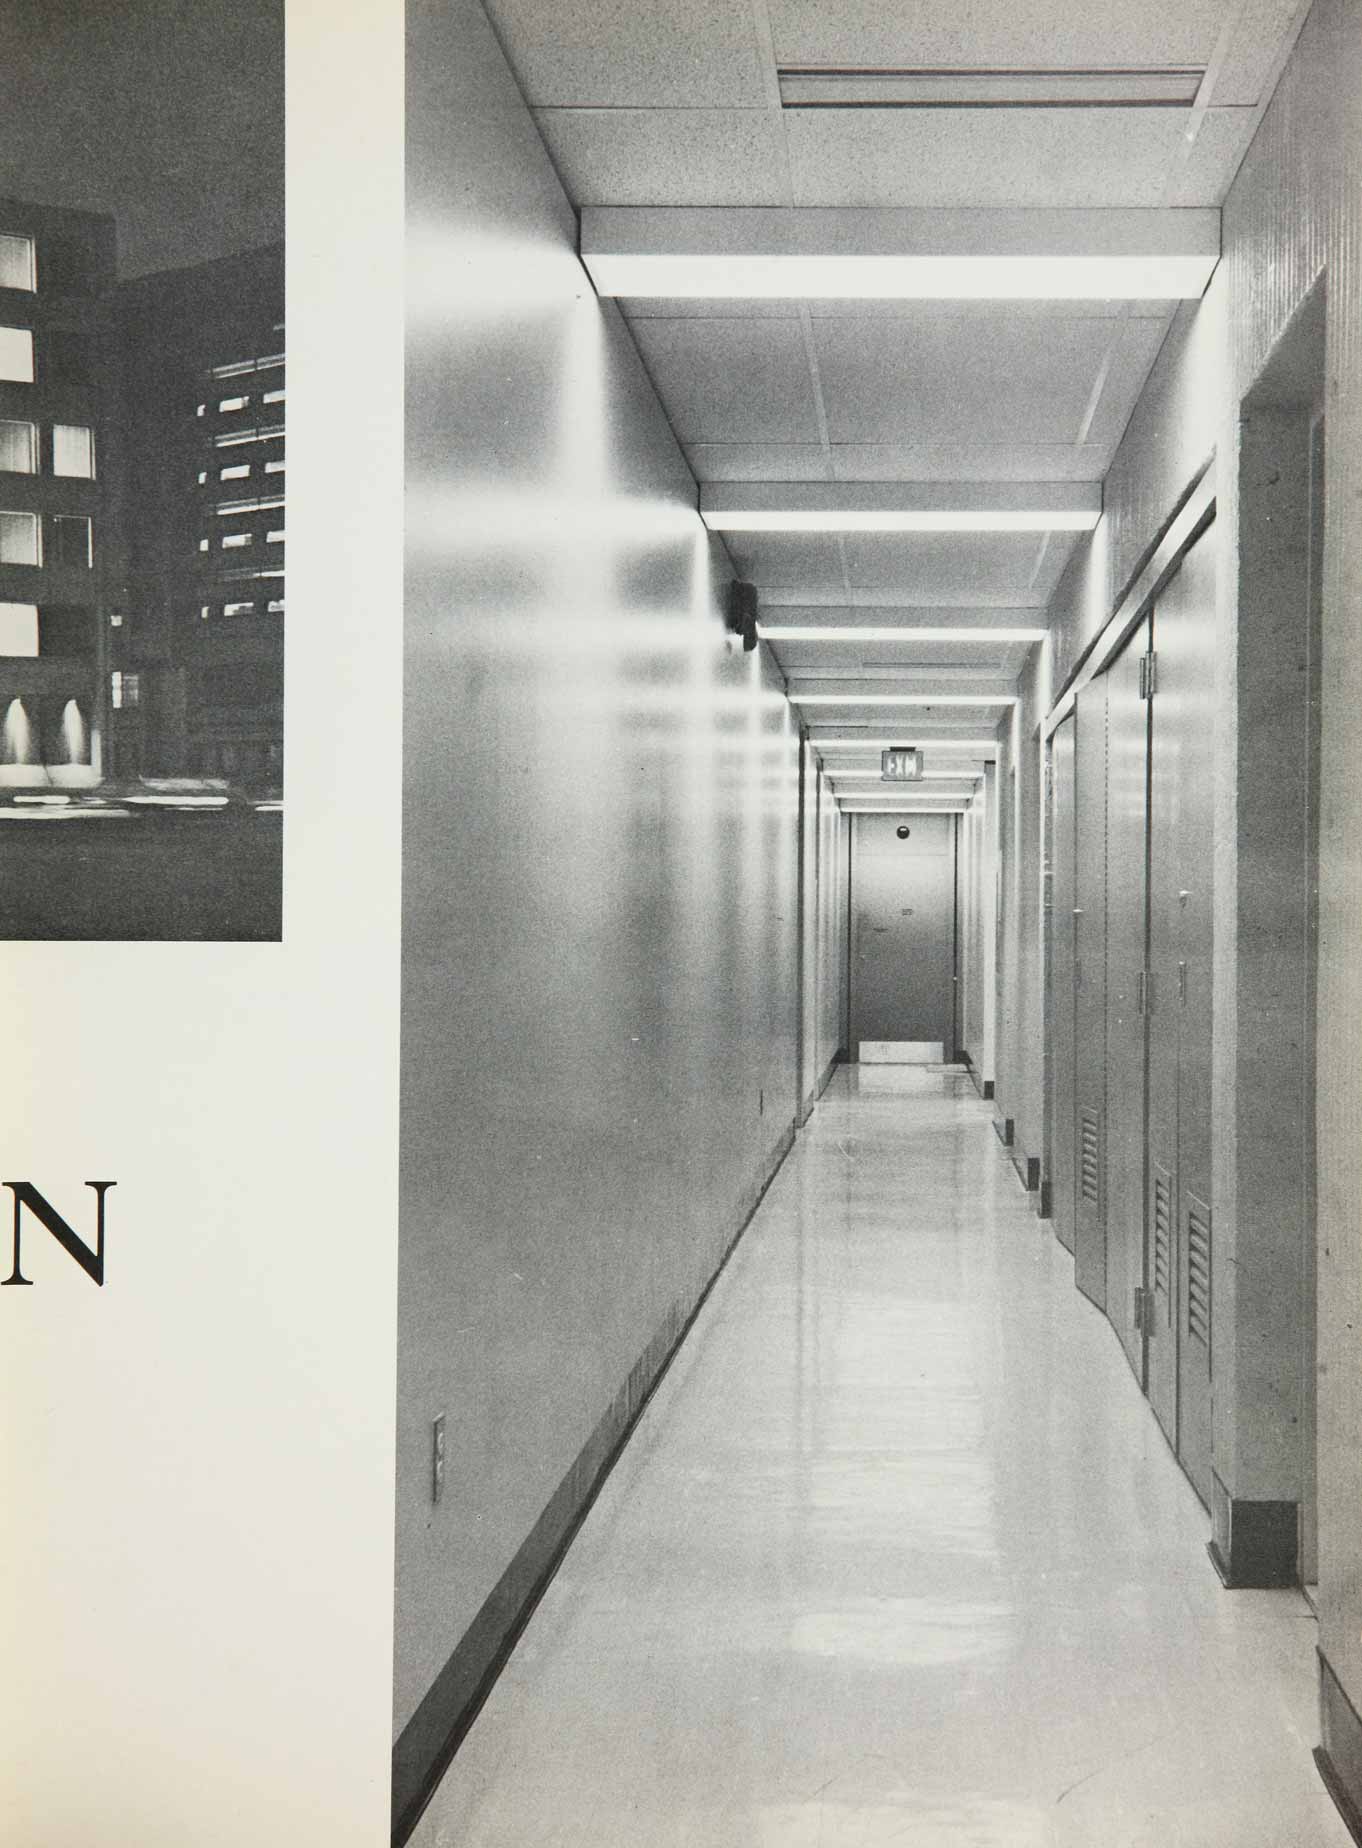 McGill Yearbook: 1973